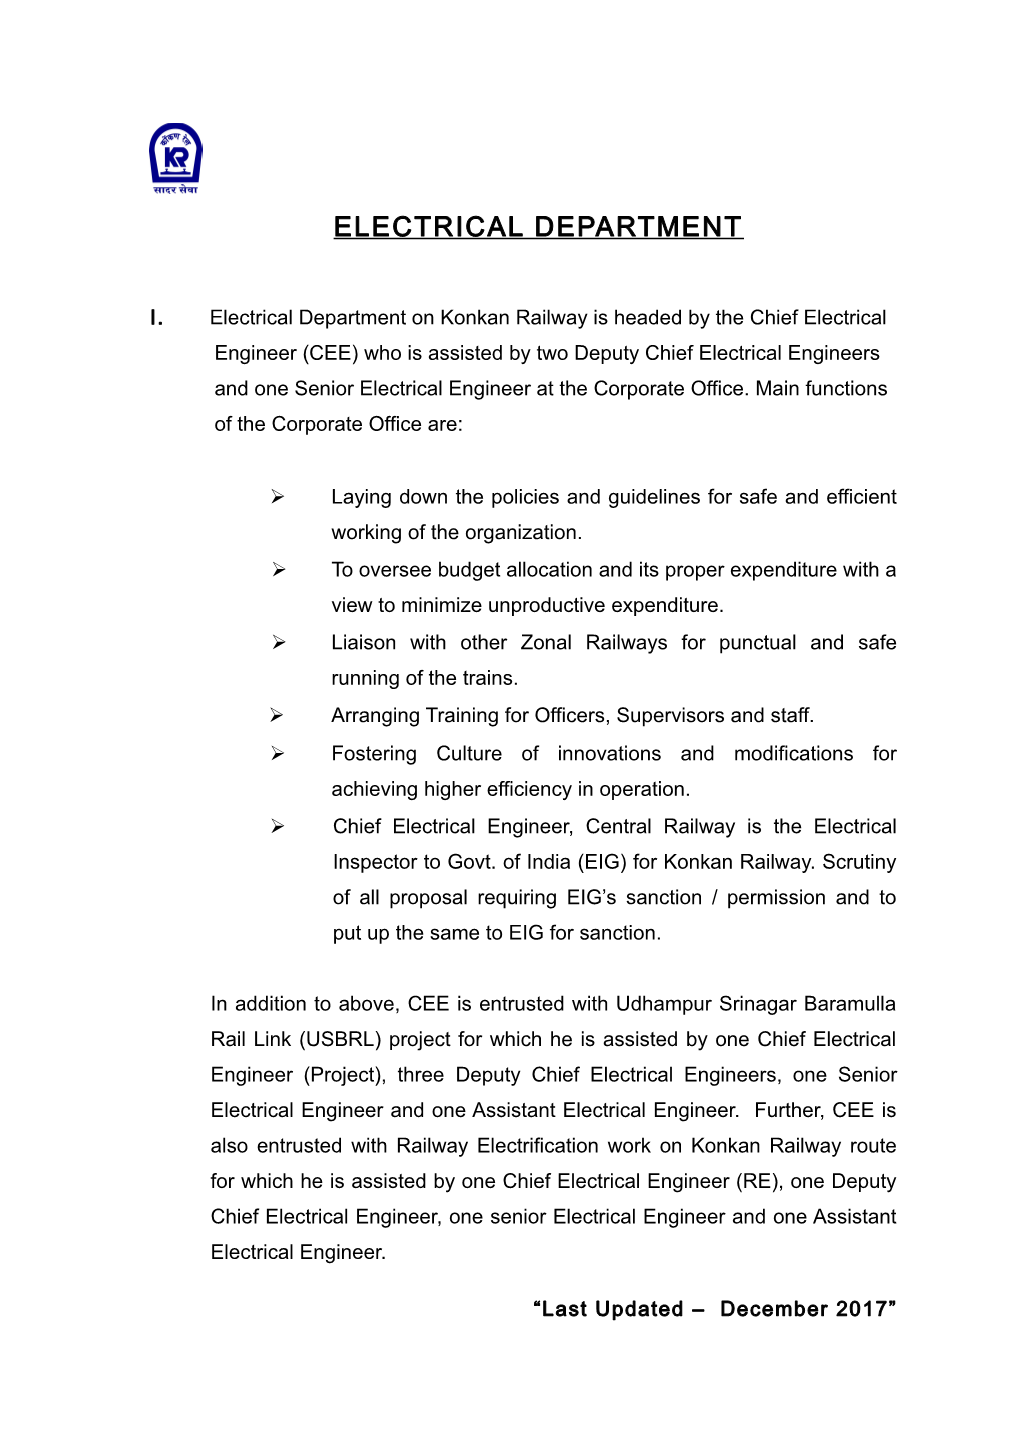 Electrical Department